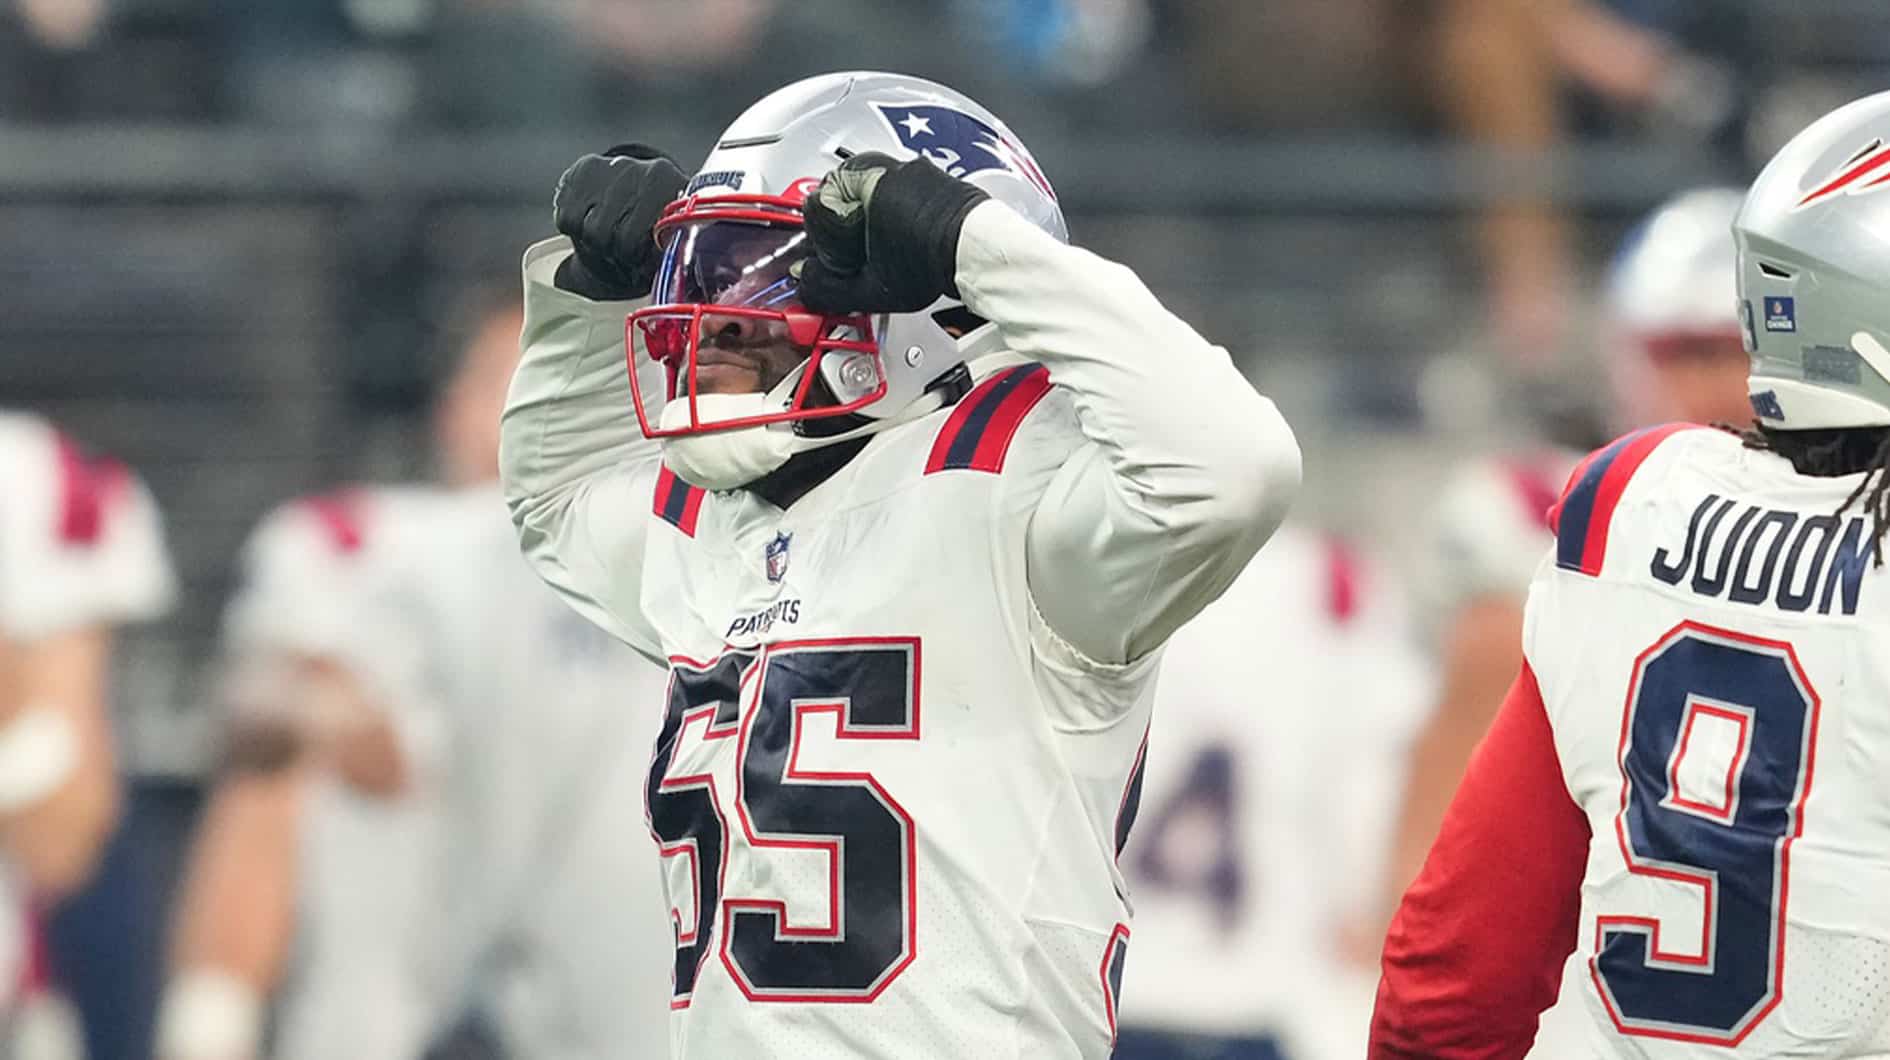 New England Patriots linebacker Josh Uche (55) celebrates after getting a sack against the Las Vegas Raiders during the second half at Allegiant Stadium.